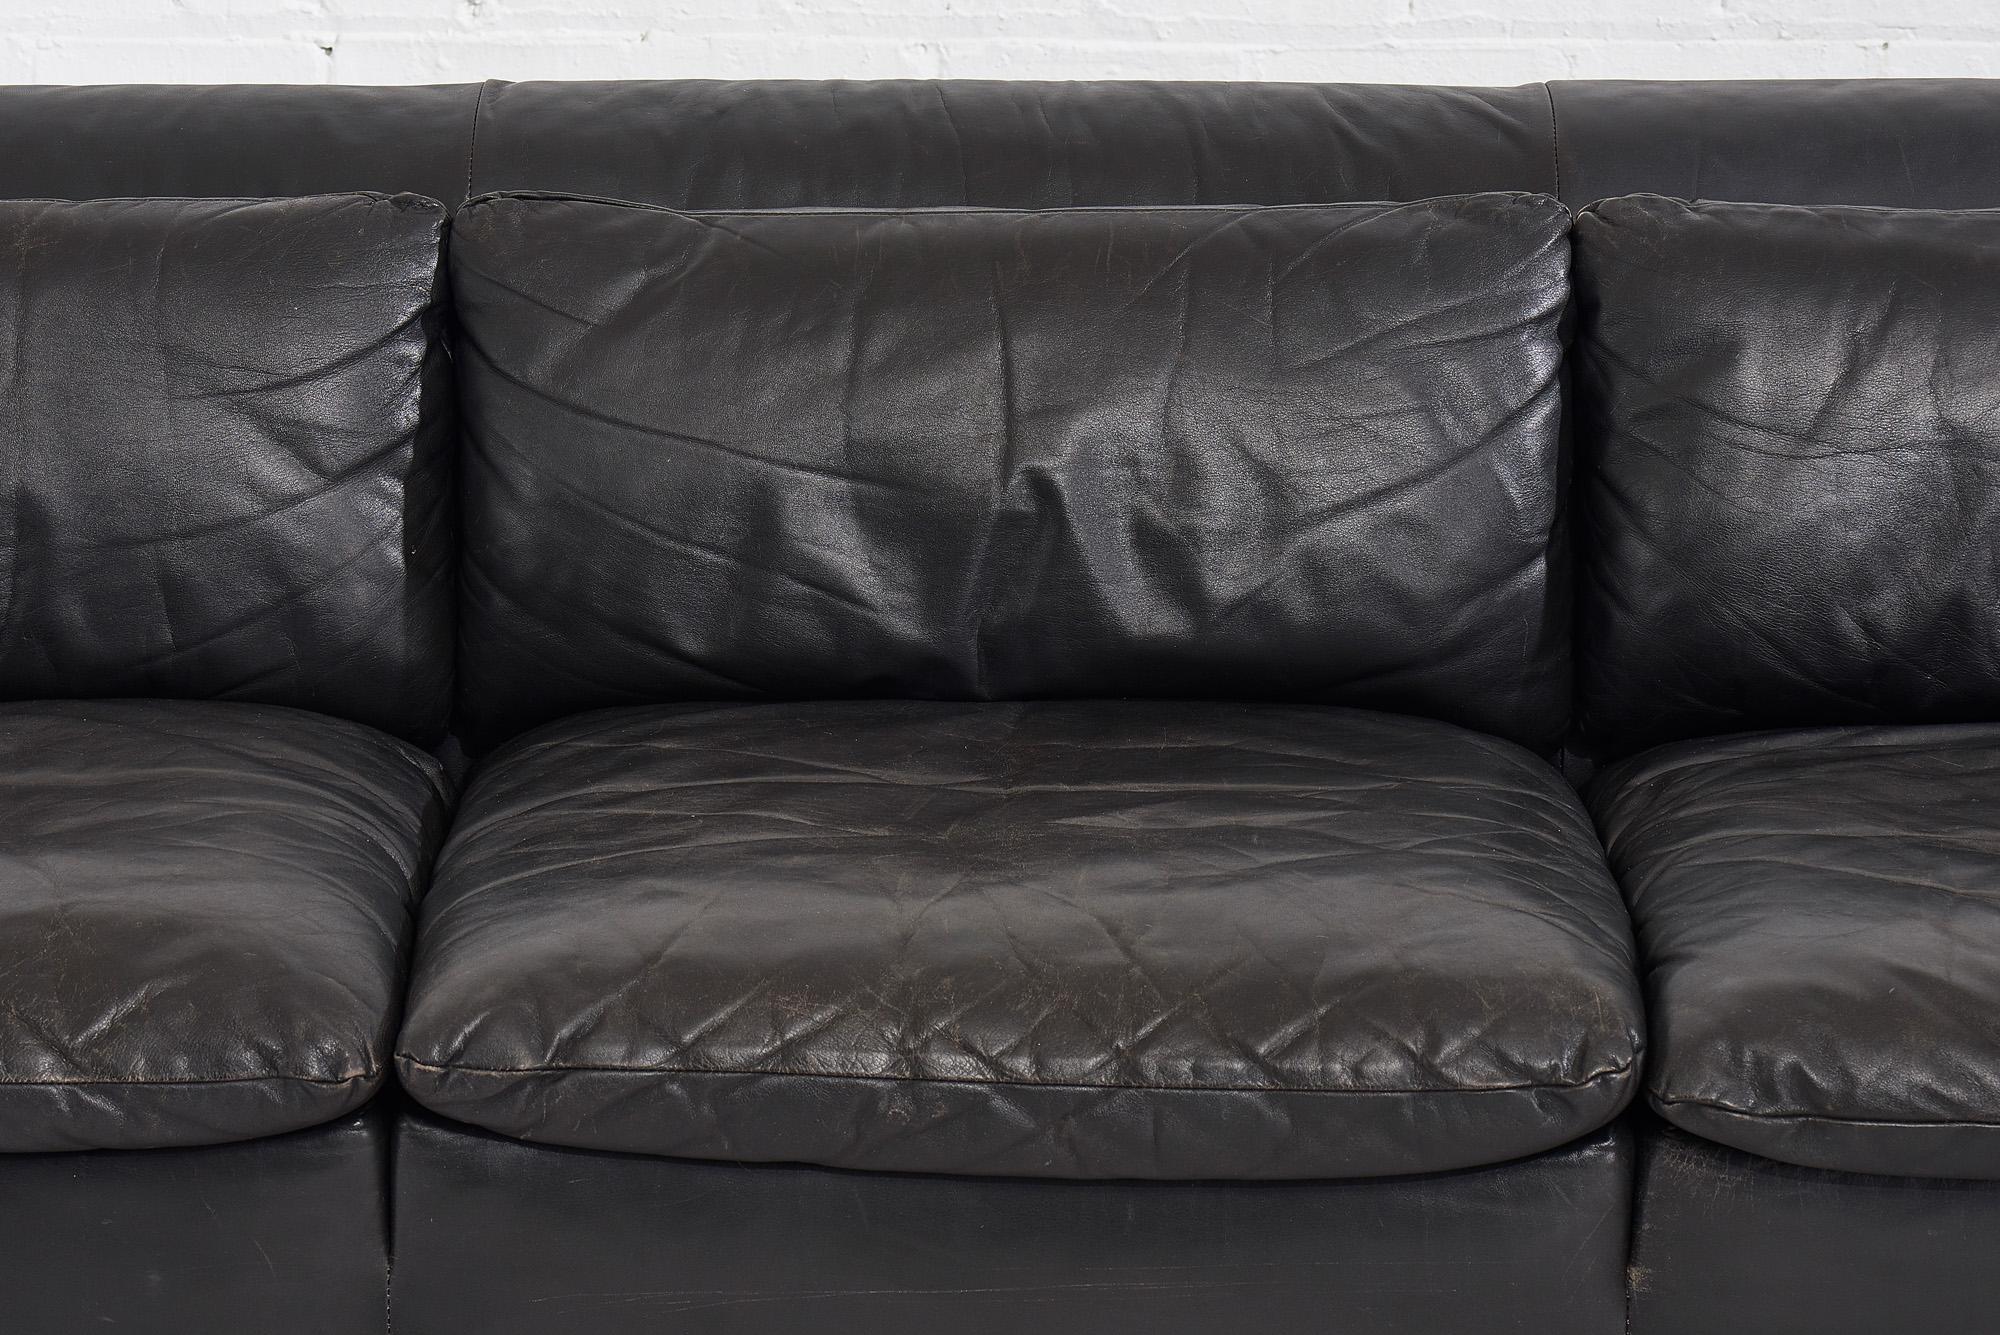 American Black Leather “Heli” Sofa by Otto Zapf for Knoll, 1980